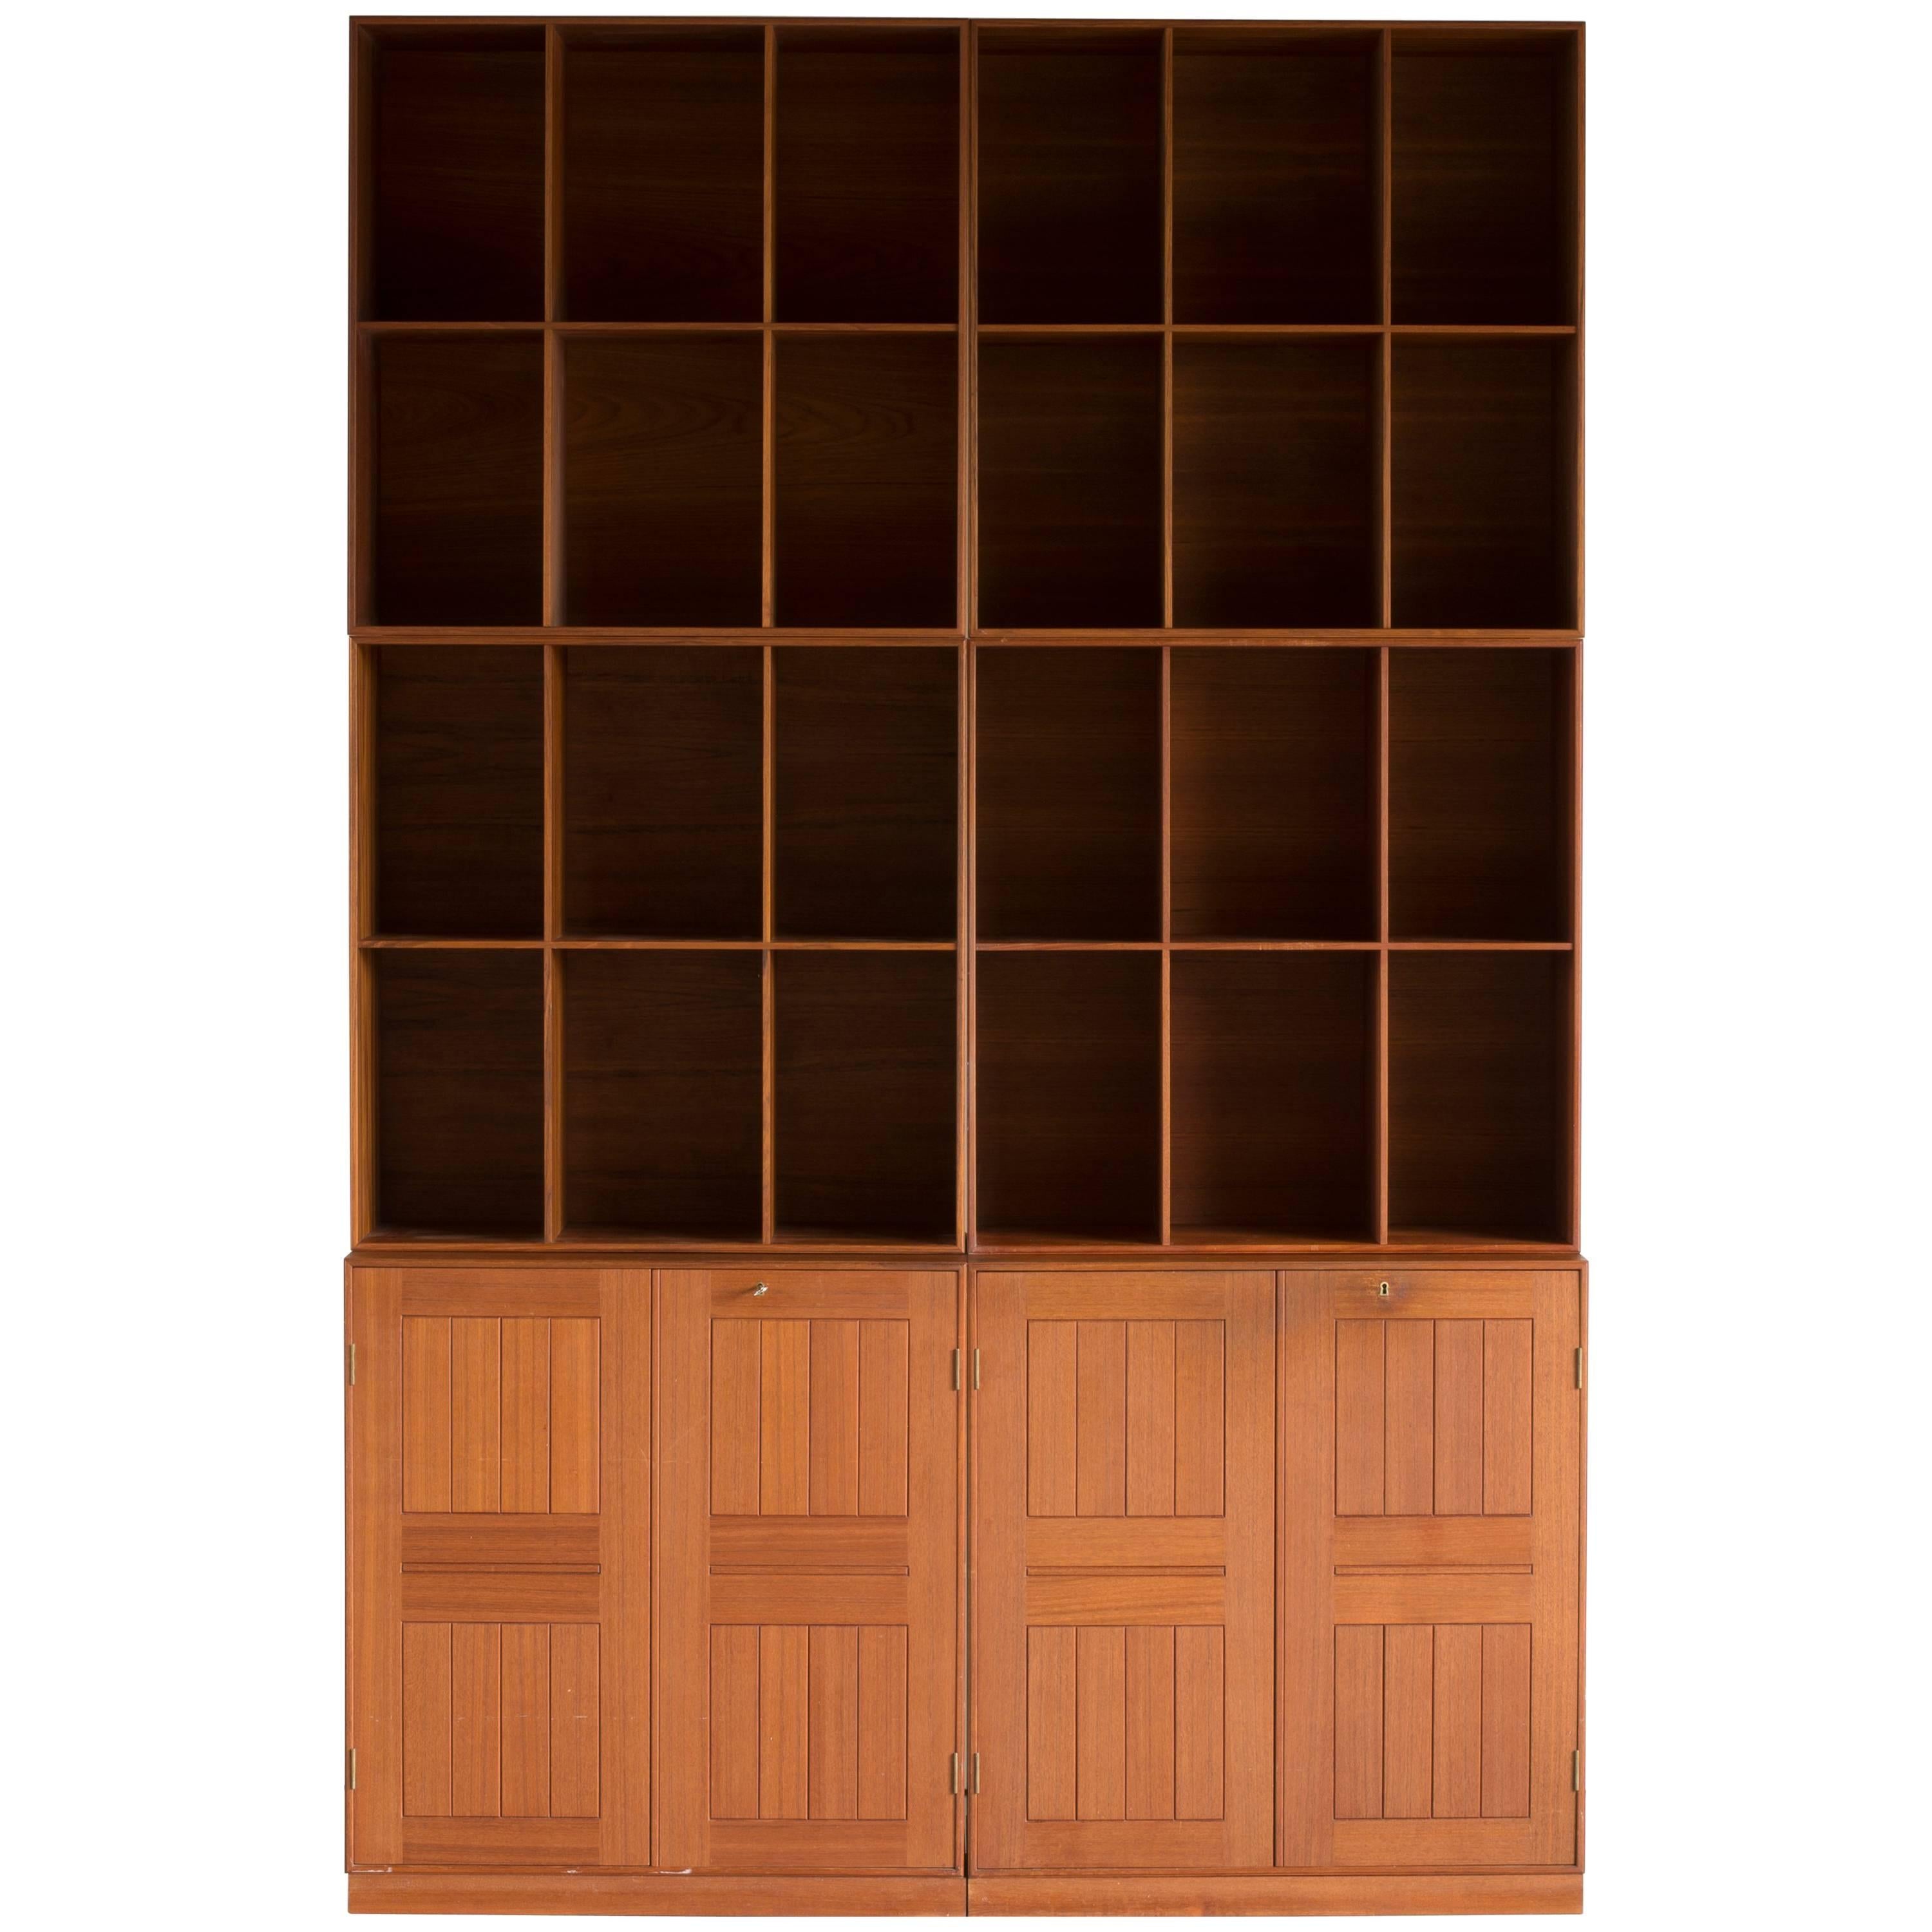 Mogens Koch Cabinets and Bookcases in Teak for Rud. Rasmussen